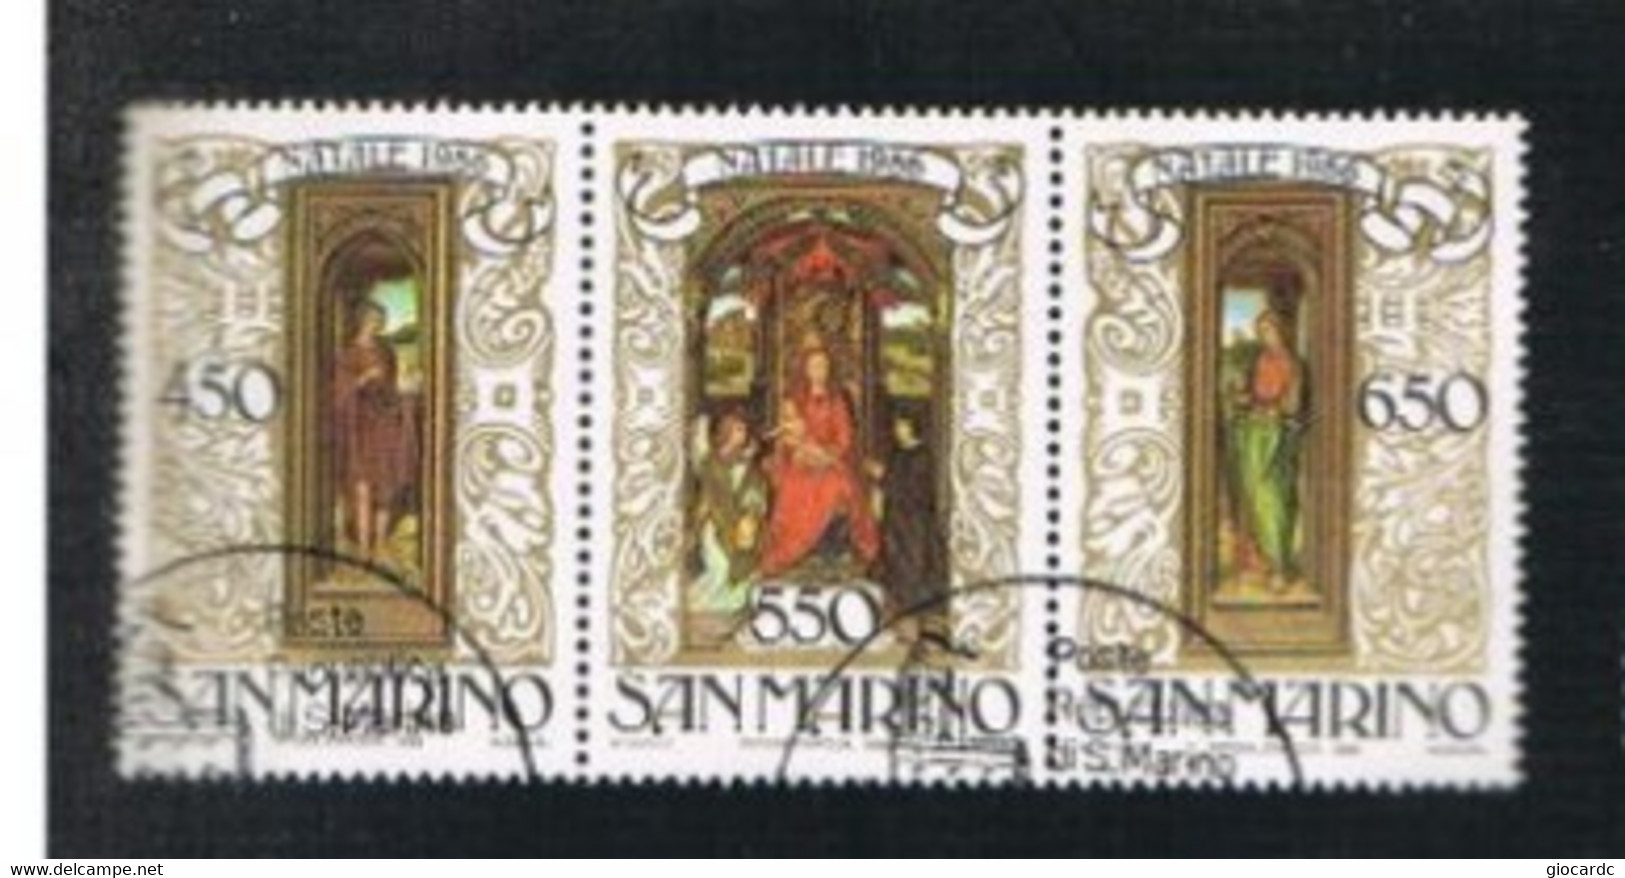 SAN MARINO - UNIF. 1192.1194 - 1986 NATALE (COMPLET SET OF 3 SE-TENANT)  - USED° - Gebraucht